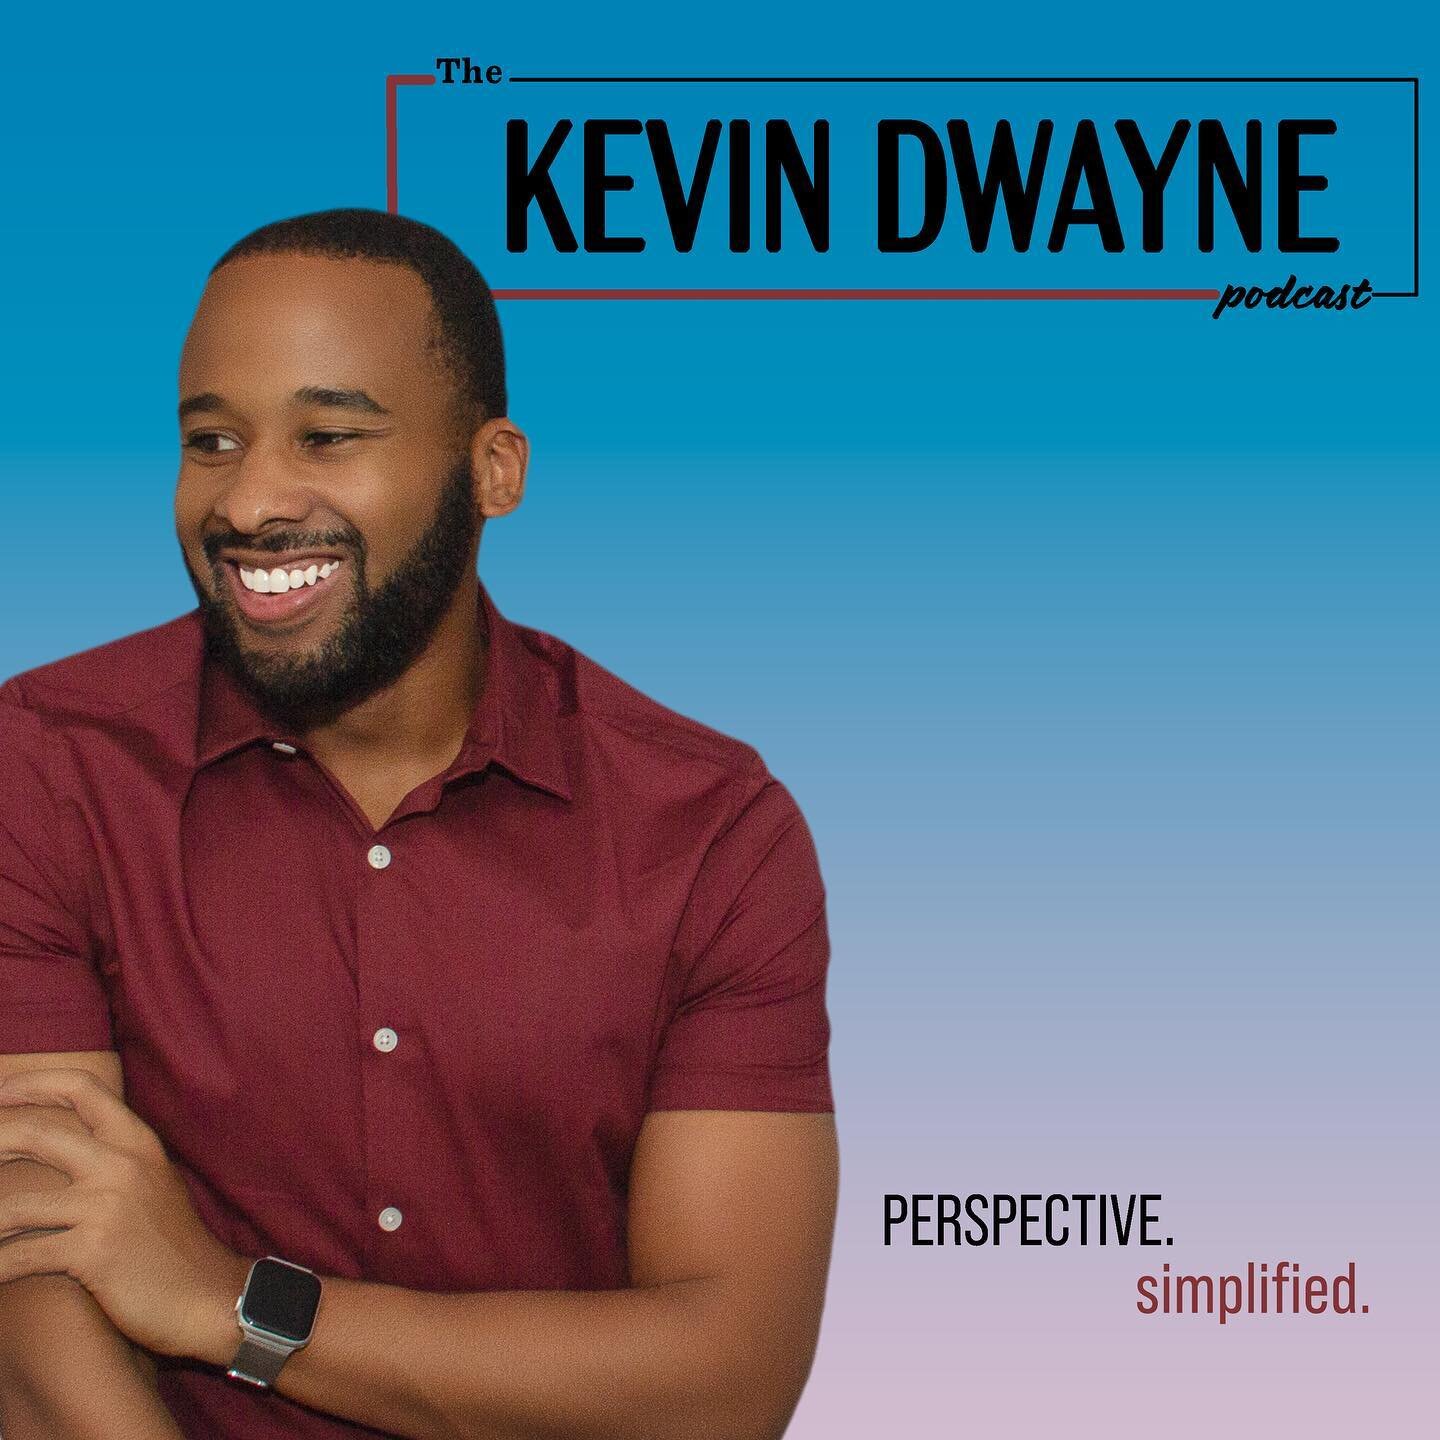 &ldquo;The Outline Podcast&rdquo; is now &ldquo;The Kevin Dwayne Podcast&rdquo;. New Shows in October. 

#podcast #kevindwaynepod #comedypodcast #entertainment podcast #gaypodcast #gaypodcaster